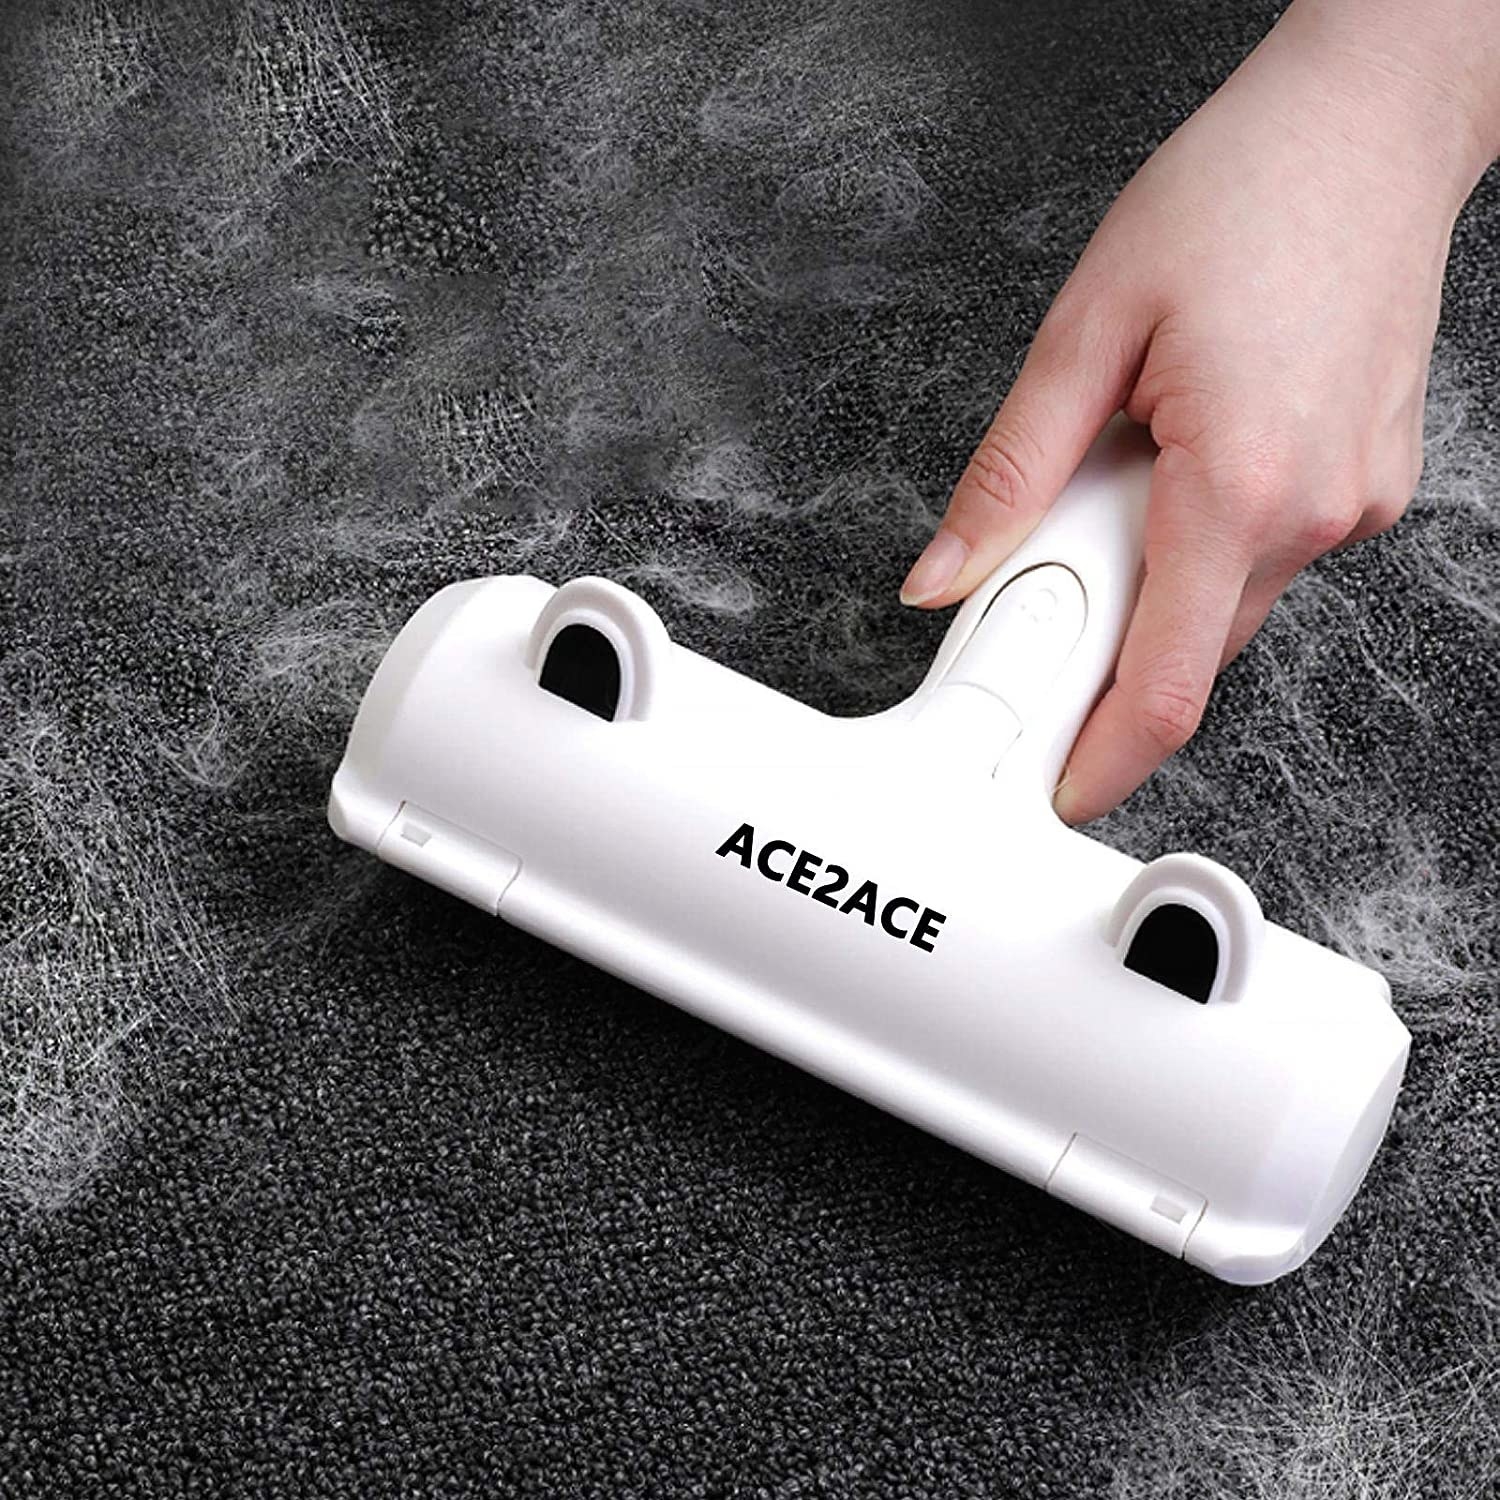 The lint roller collecting fur off of a fabric surface